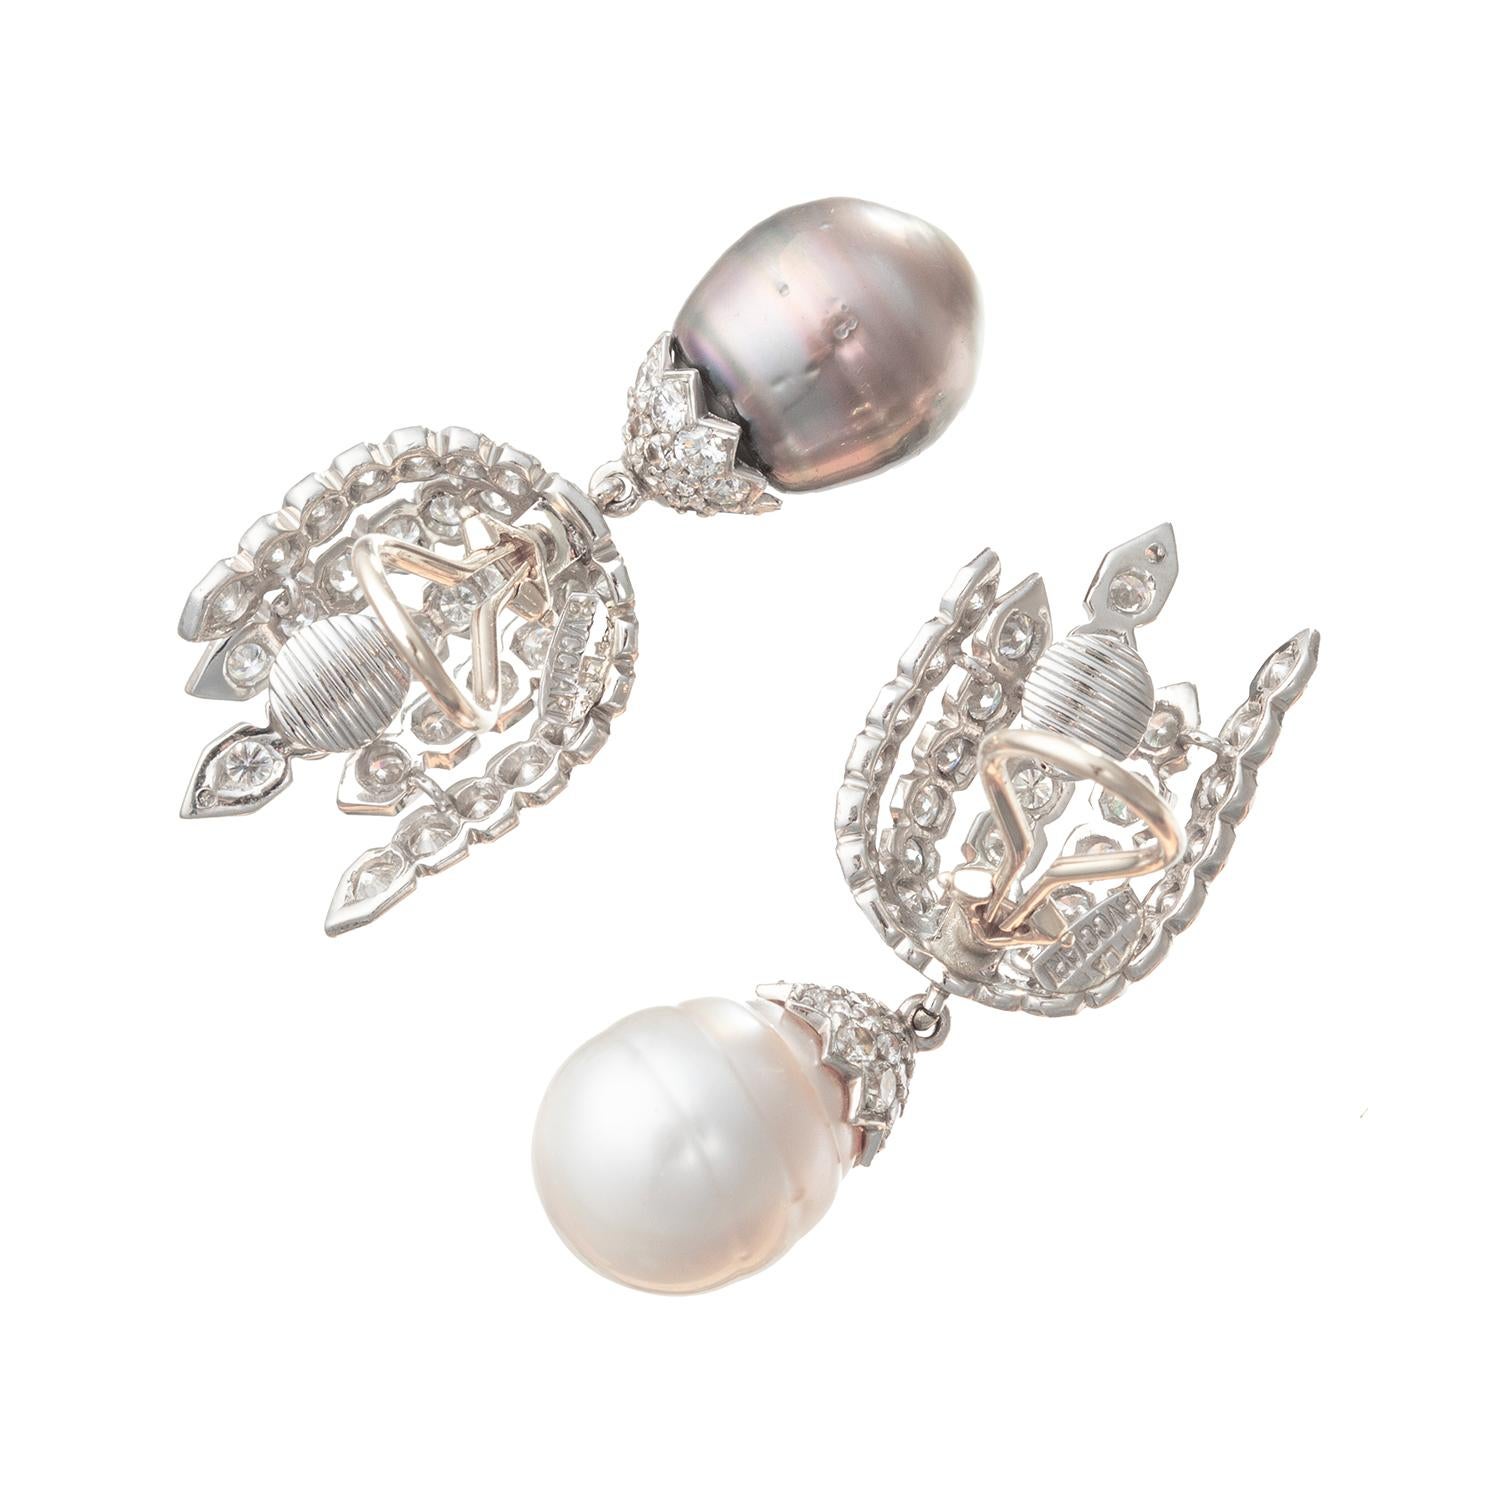 These fine vintage day and night clip-on pendant earrings were designed by Bvcciari.  One earring features a creamy-white cultured South Sea pearl drop and the other has a gray cultured Tahitian pearl drop.  The earrings are suspended from round-cut